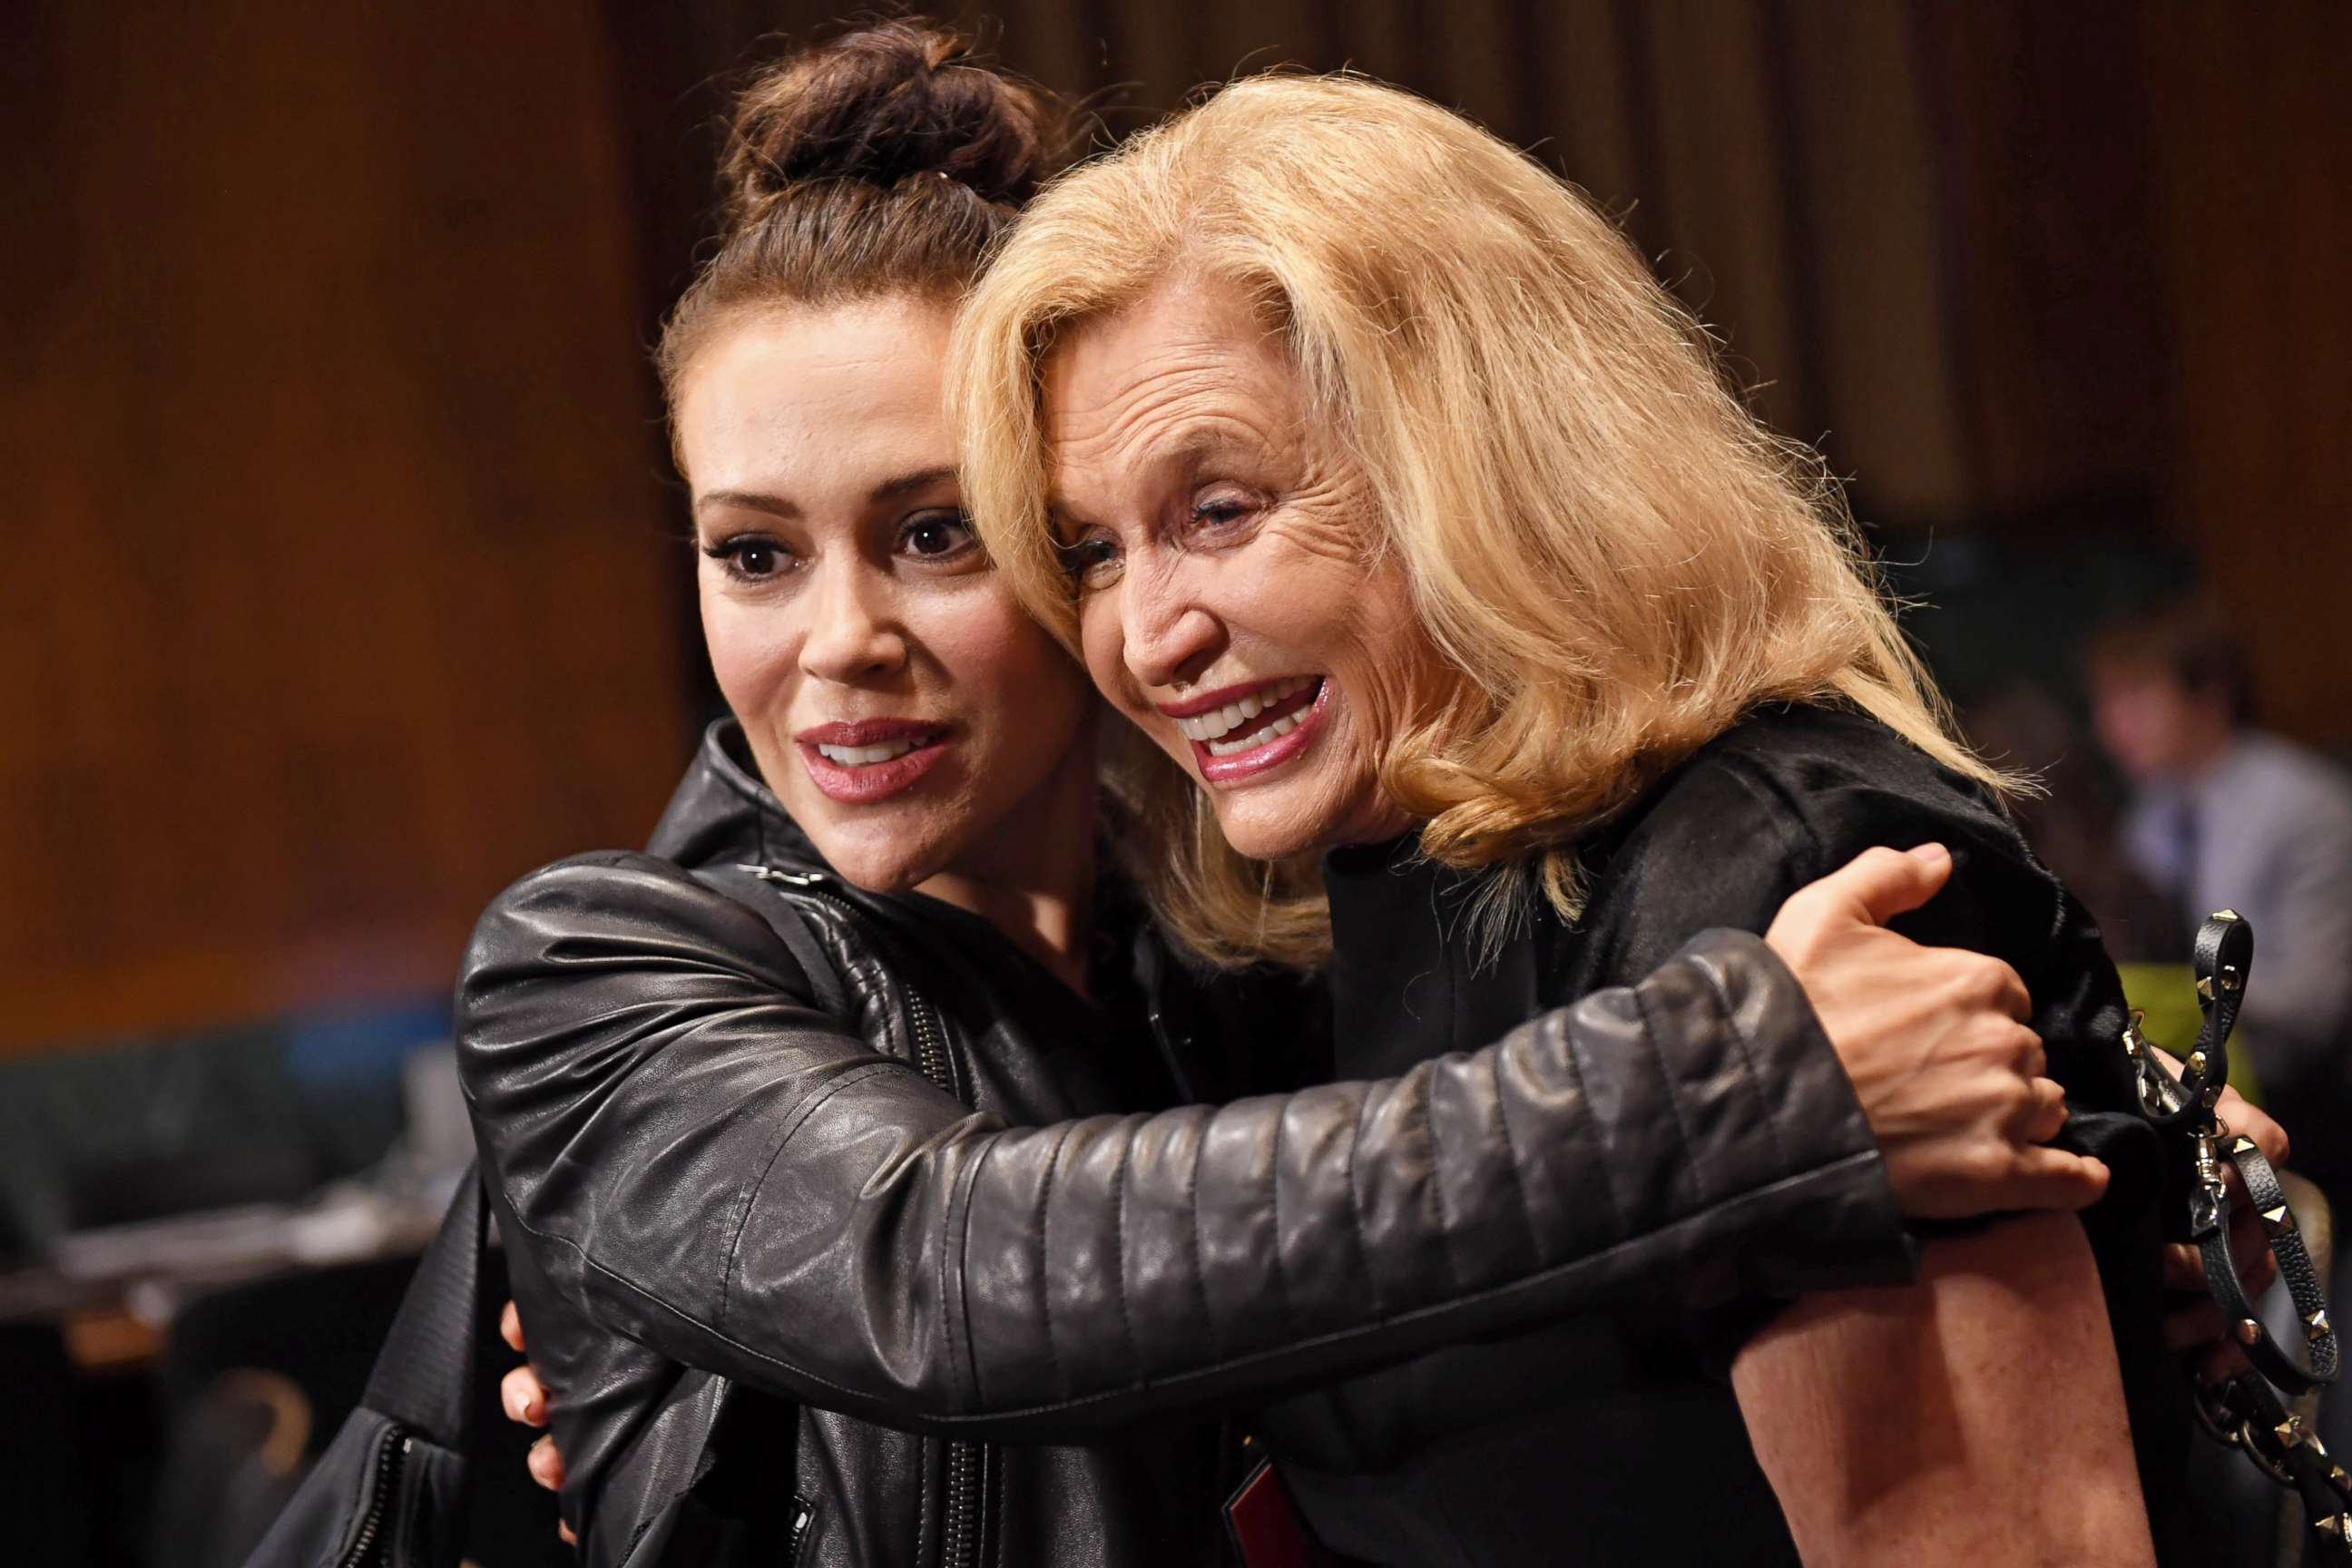 PHOTO: Actress Alyssa Milano hugs Rep. Carolyn Maloney in the hearing room prior to the Senate Judiciary Committee hearing on the nomination of Brett Kavanaugh on Capitol Hill in Washington, Sept. 27, 2018.